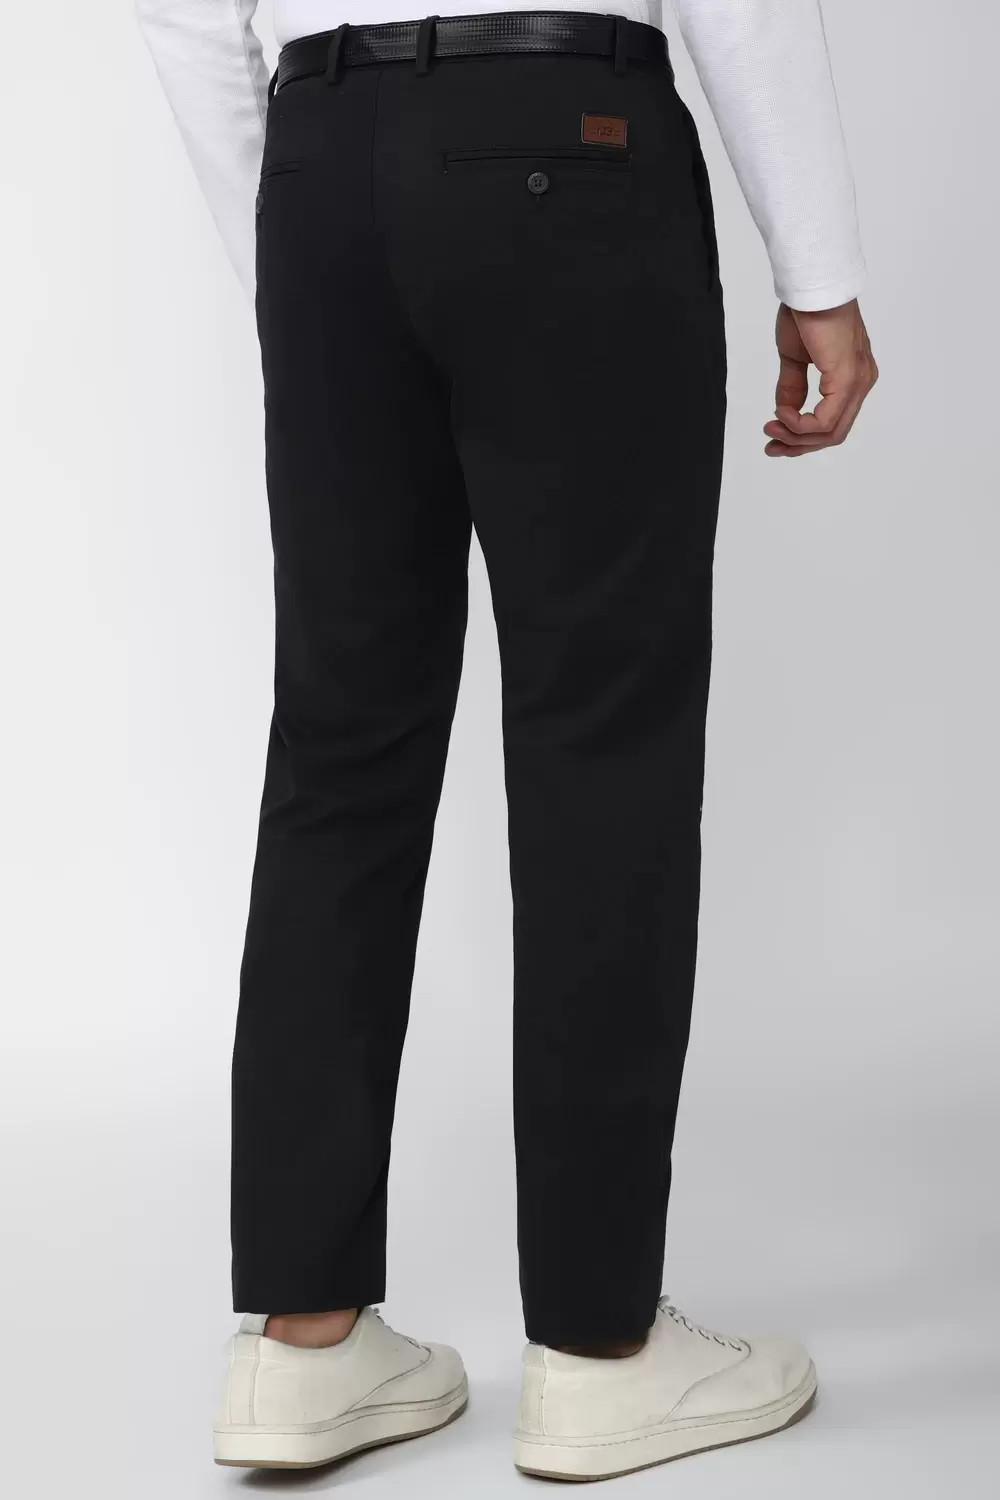 Buy Black Trousers & Pants for Men by PETER ENGLAND Online | Ajio.com